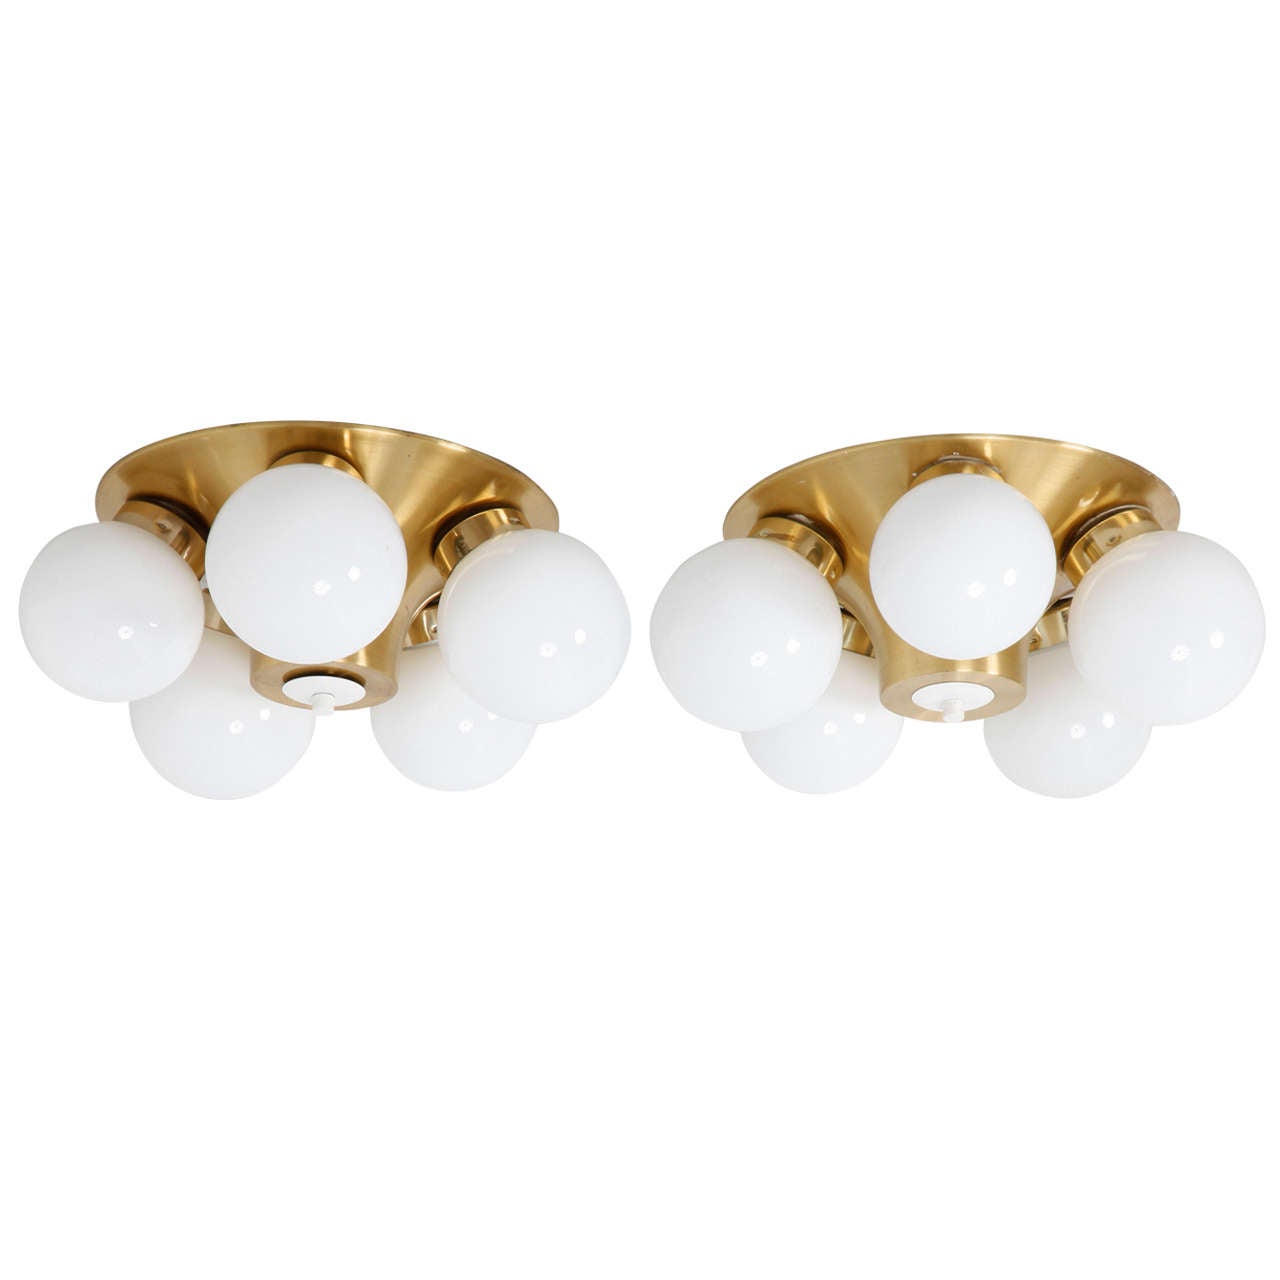 Set Brass Seventies Flush Mounts with Five White Opal Globes, 1970s